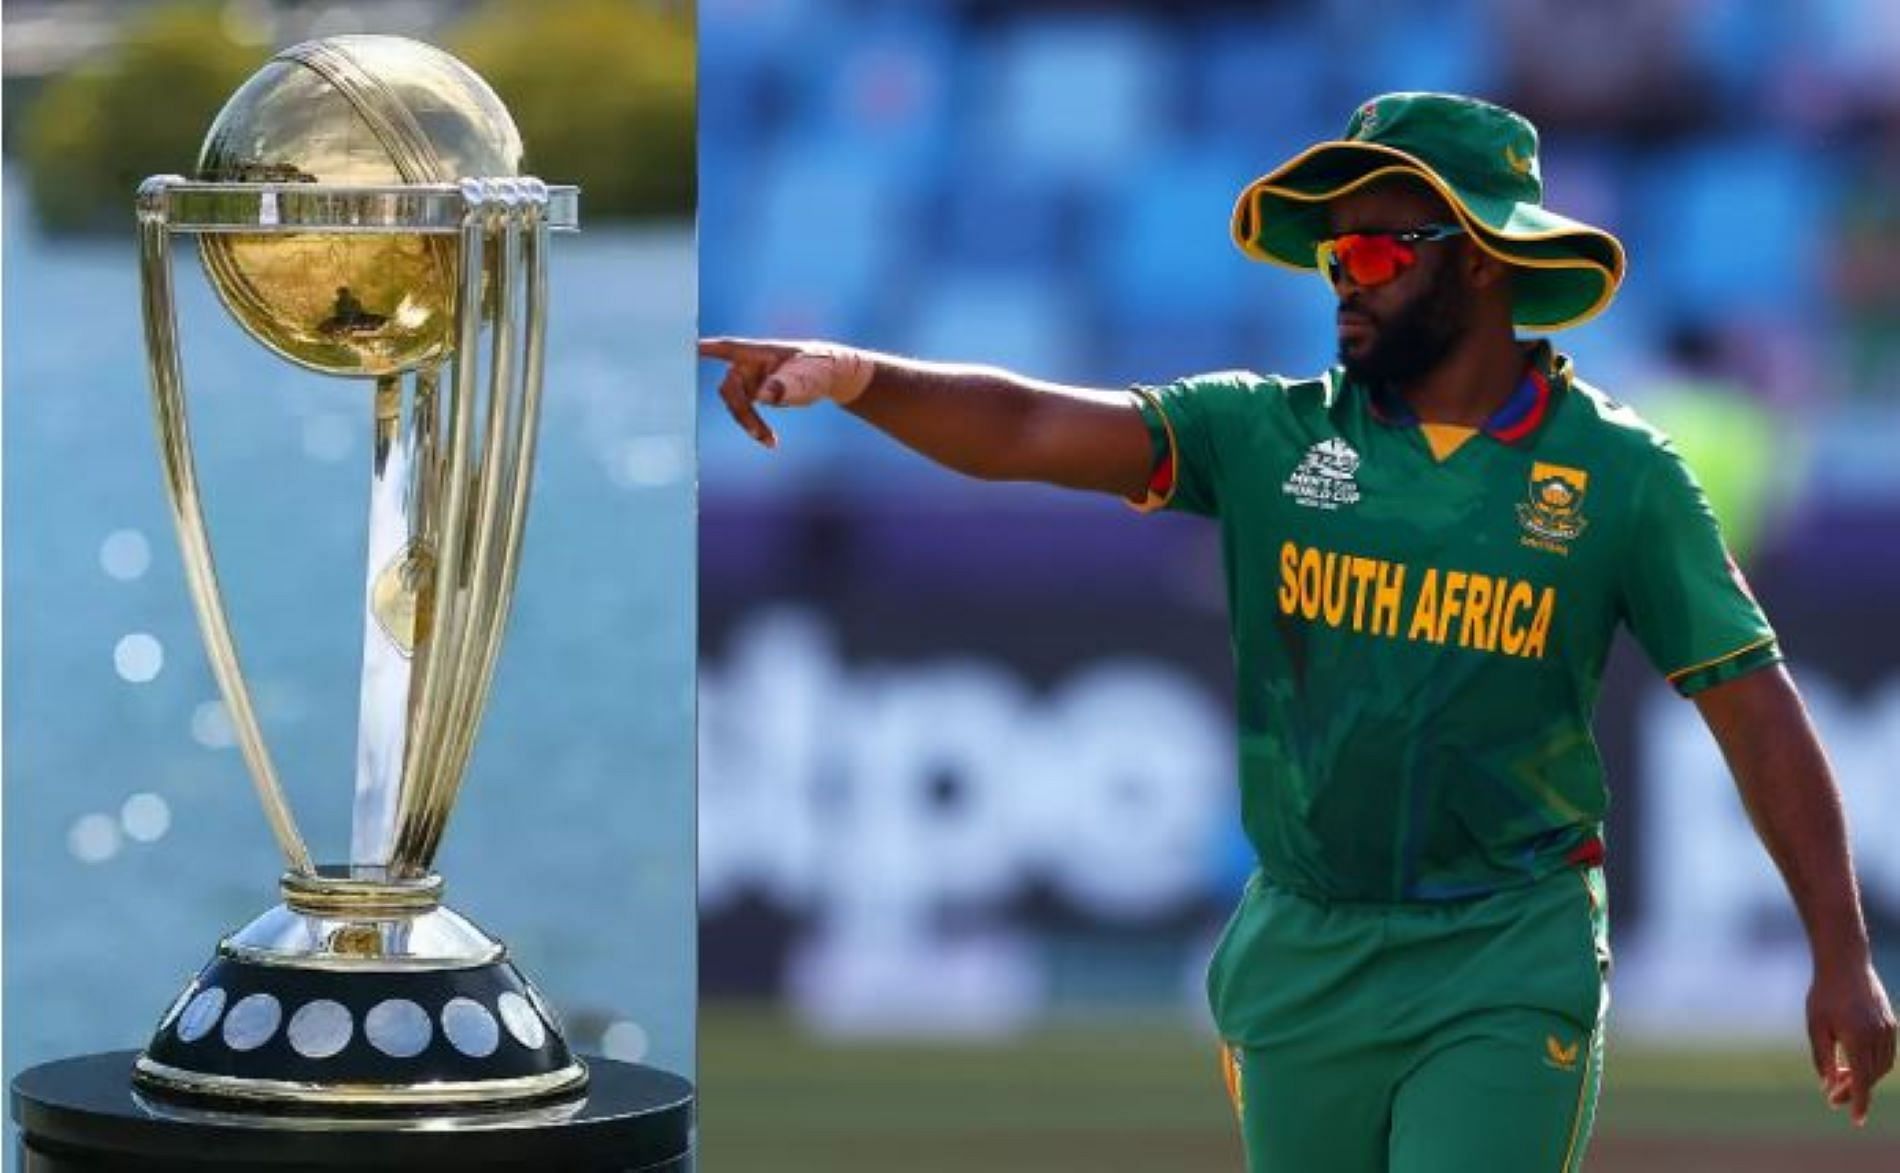 Bavuma will look to become the first South African captain to win the World Cup trophy.